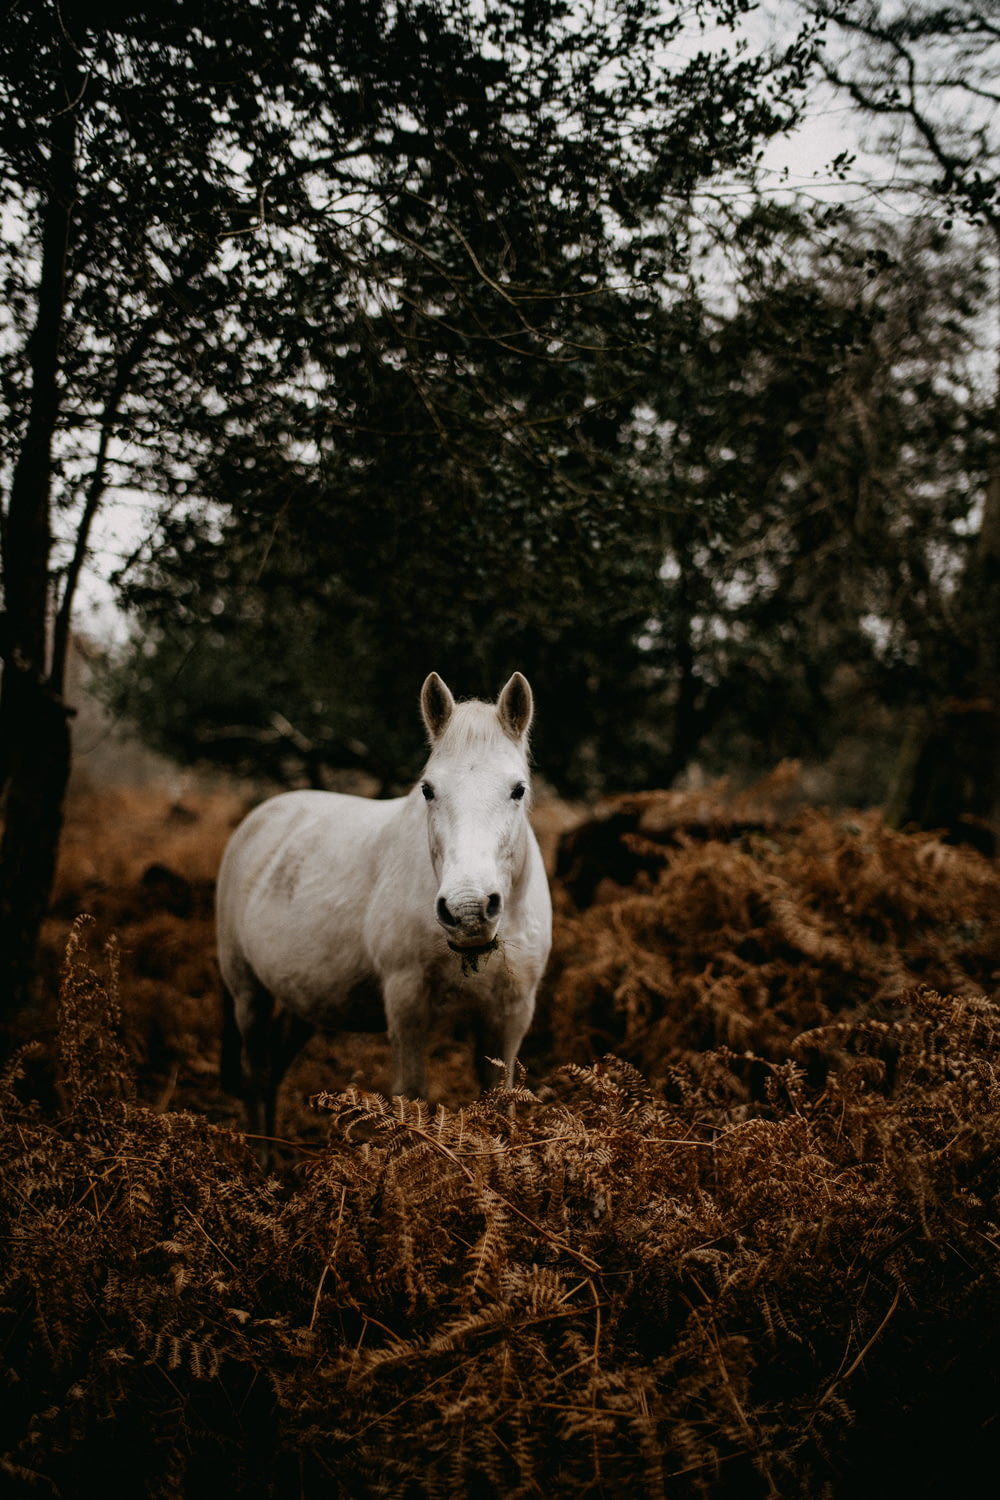 a white horse standing in the middle of a field